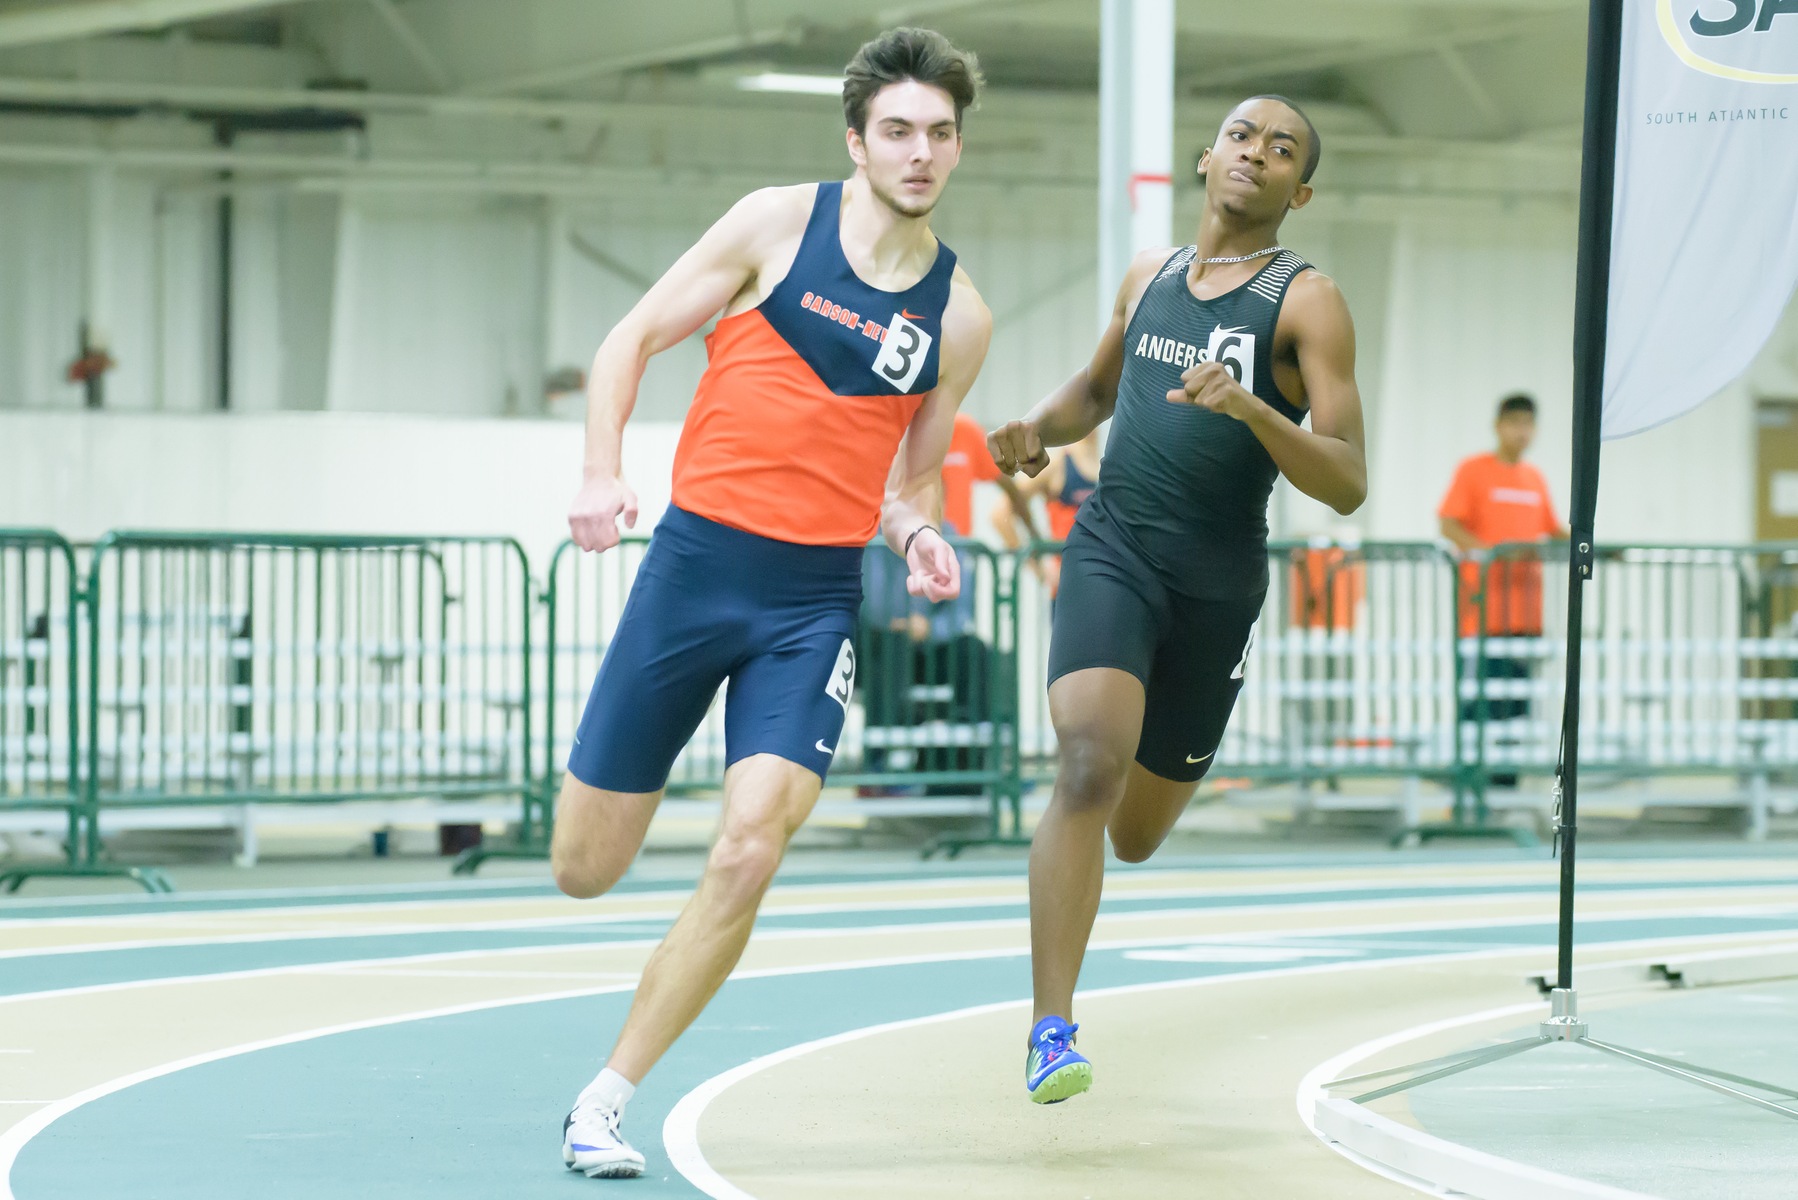 C-N Track & Field hits the ground running this weekend for the first time in over a month